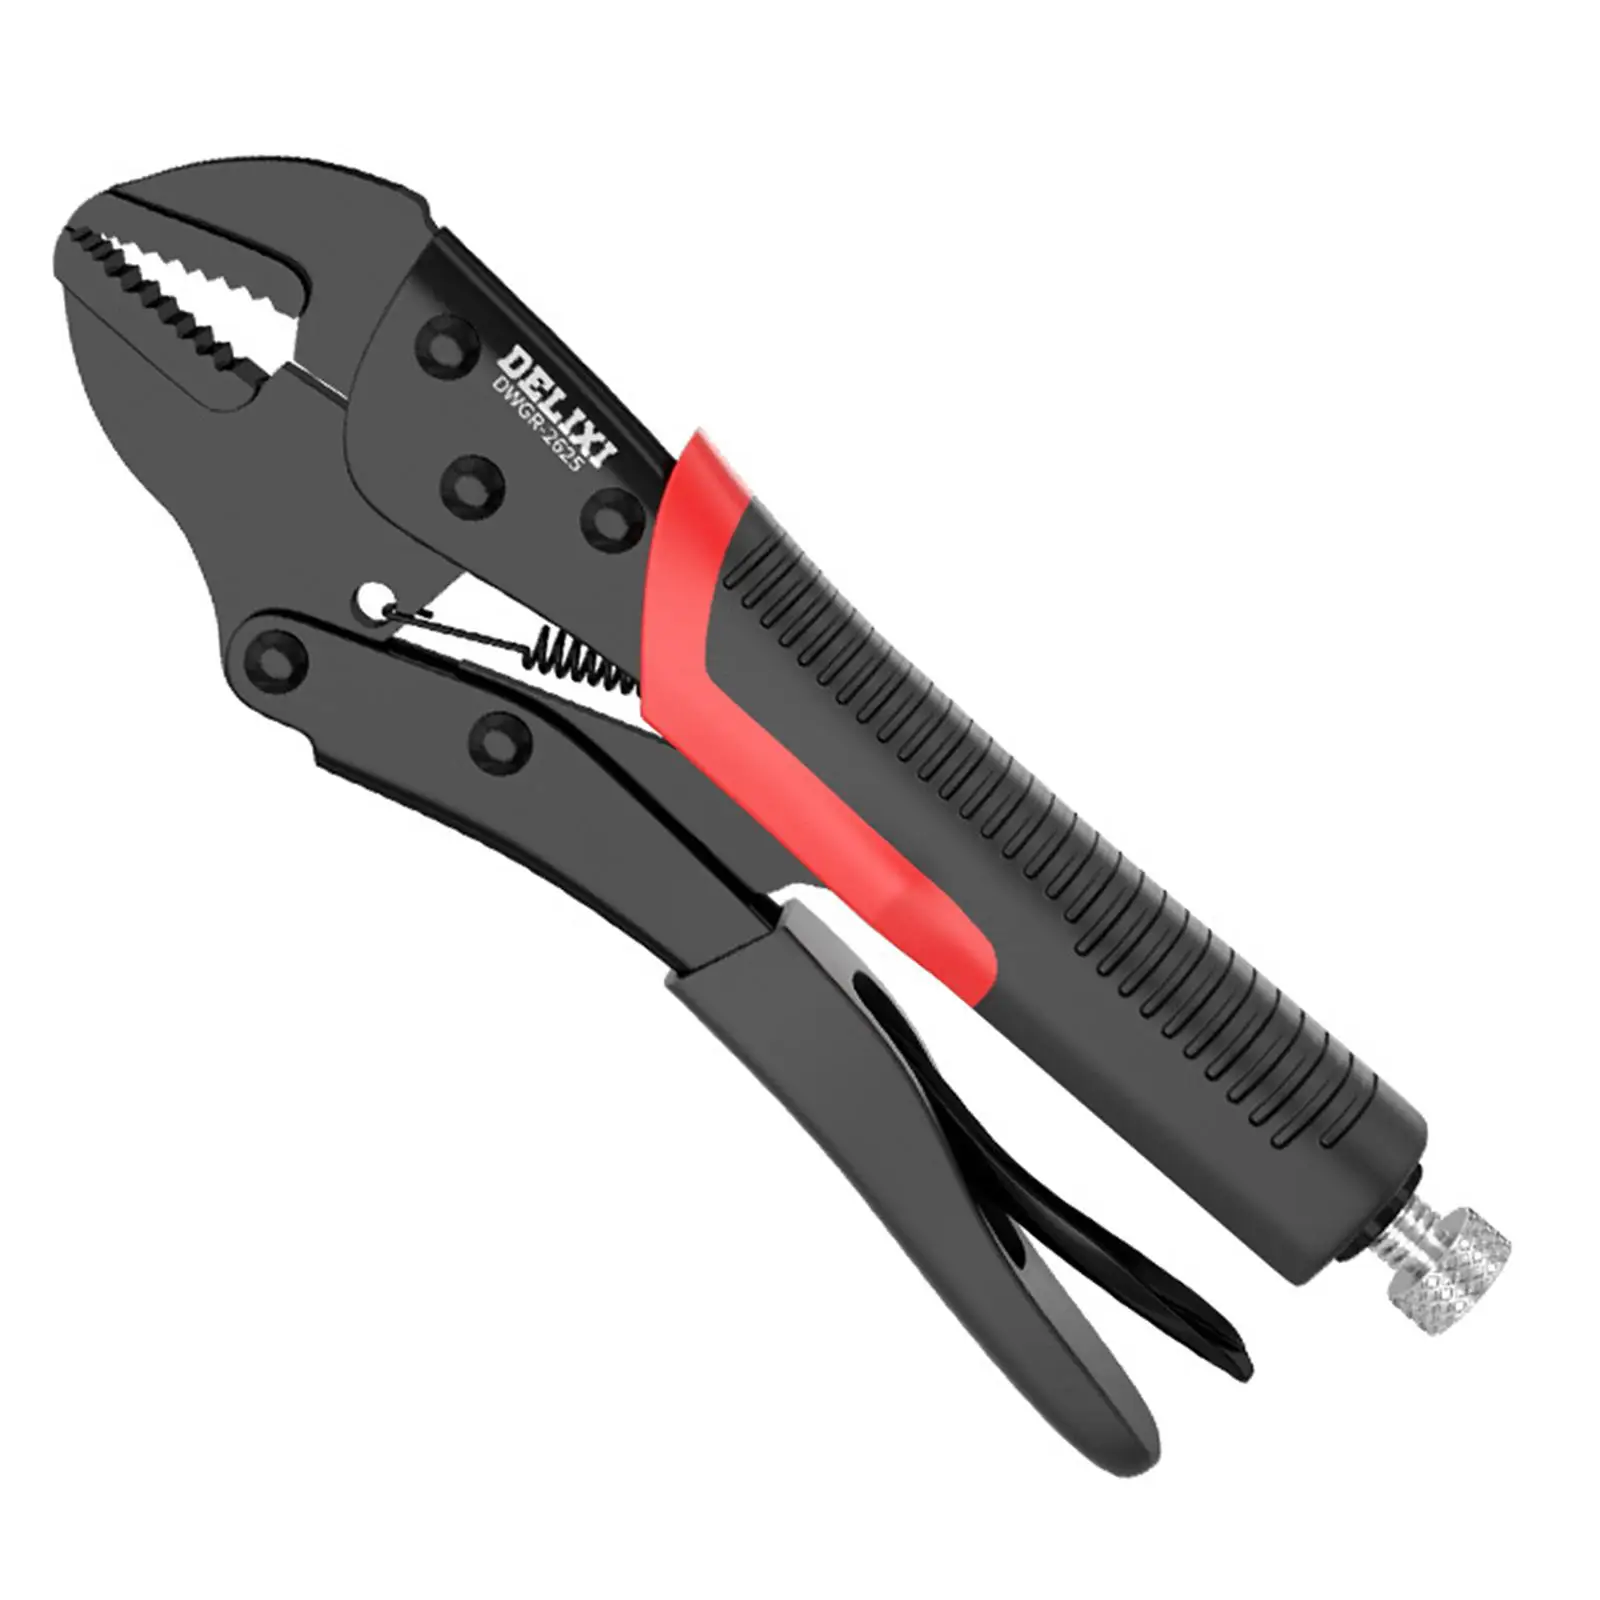 Heavy Duty Locking Plier Clamp Tool Heavy Duty Multifunction Pressure Pliers for DIY Woodworking Screw Removal Clamping Home